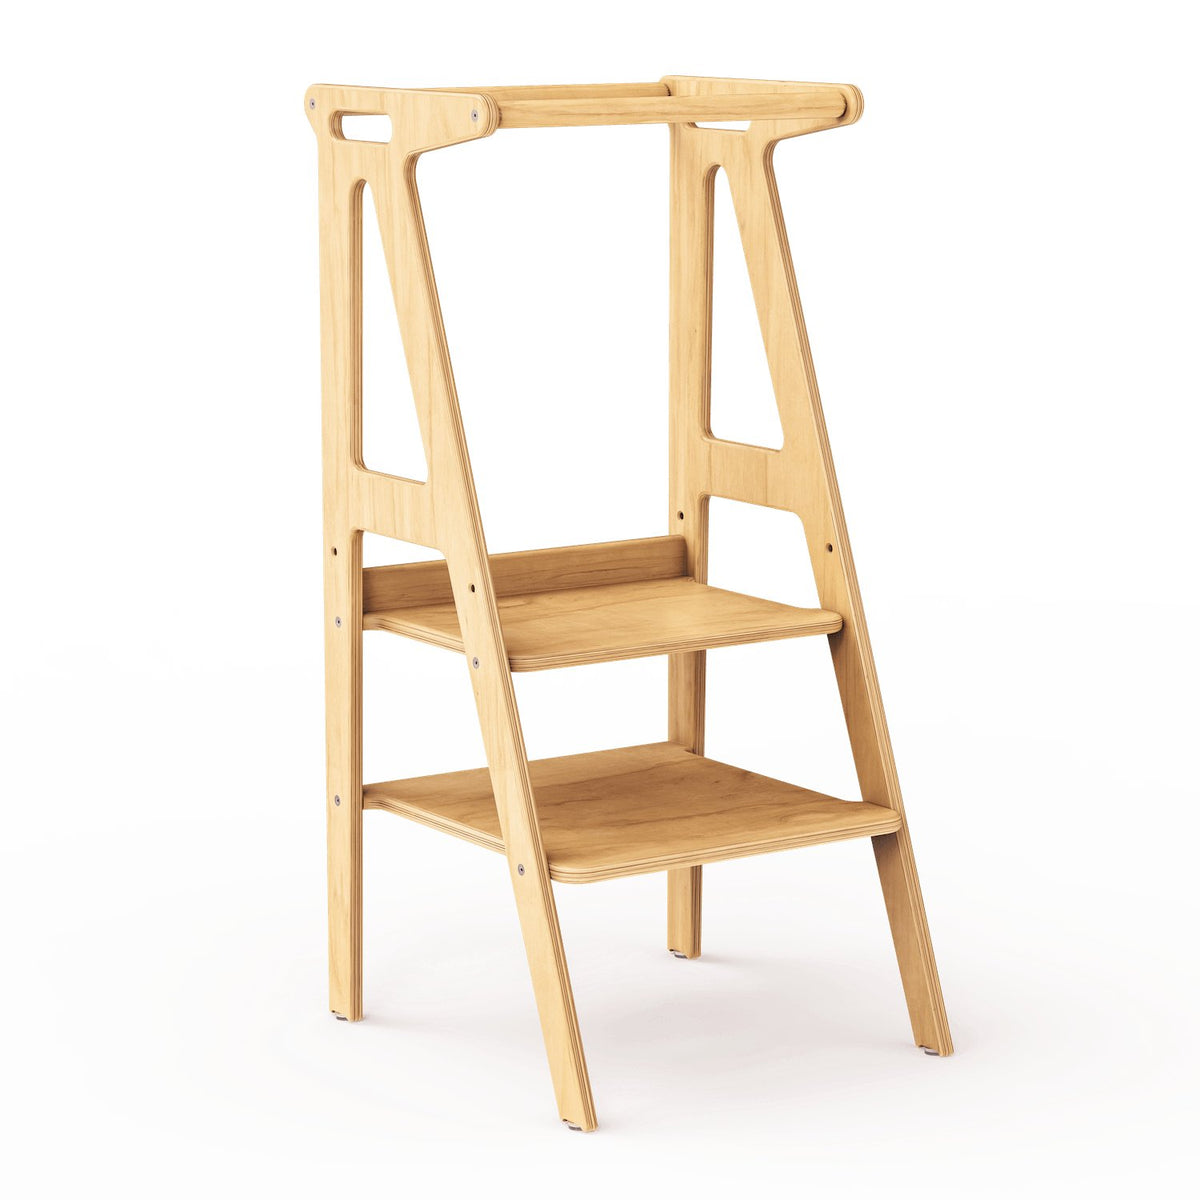 PlayTower Wooden Kitchen Tower by All Circles - Maude Kids Decor